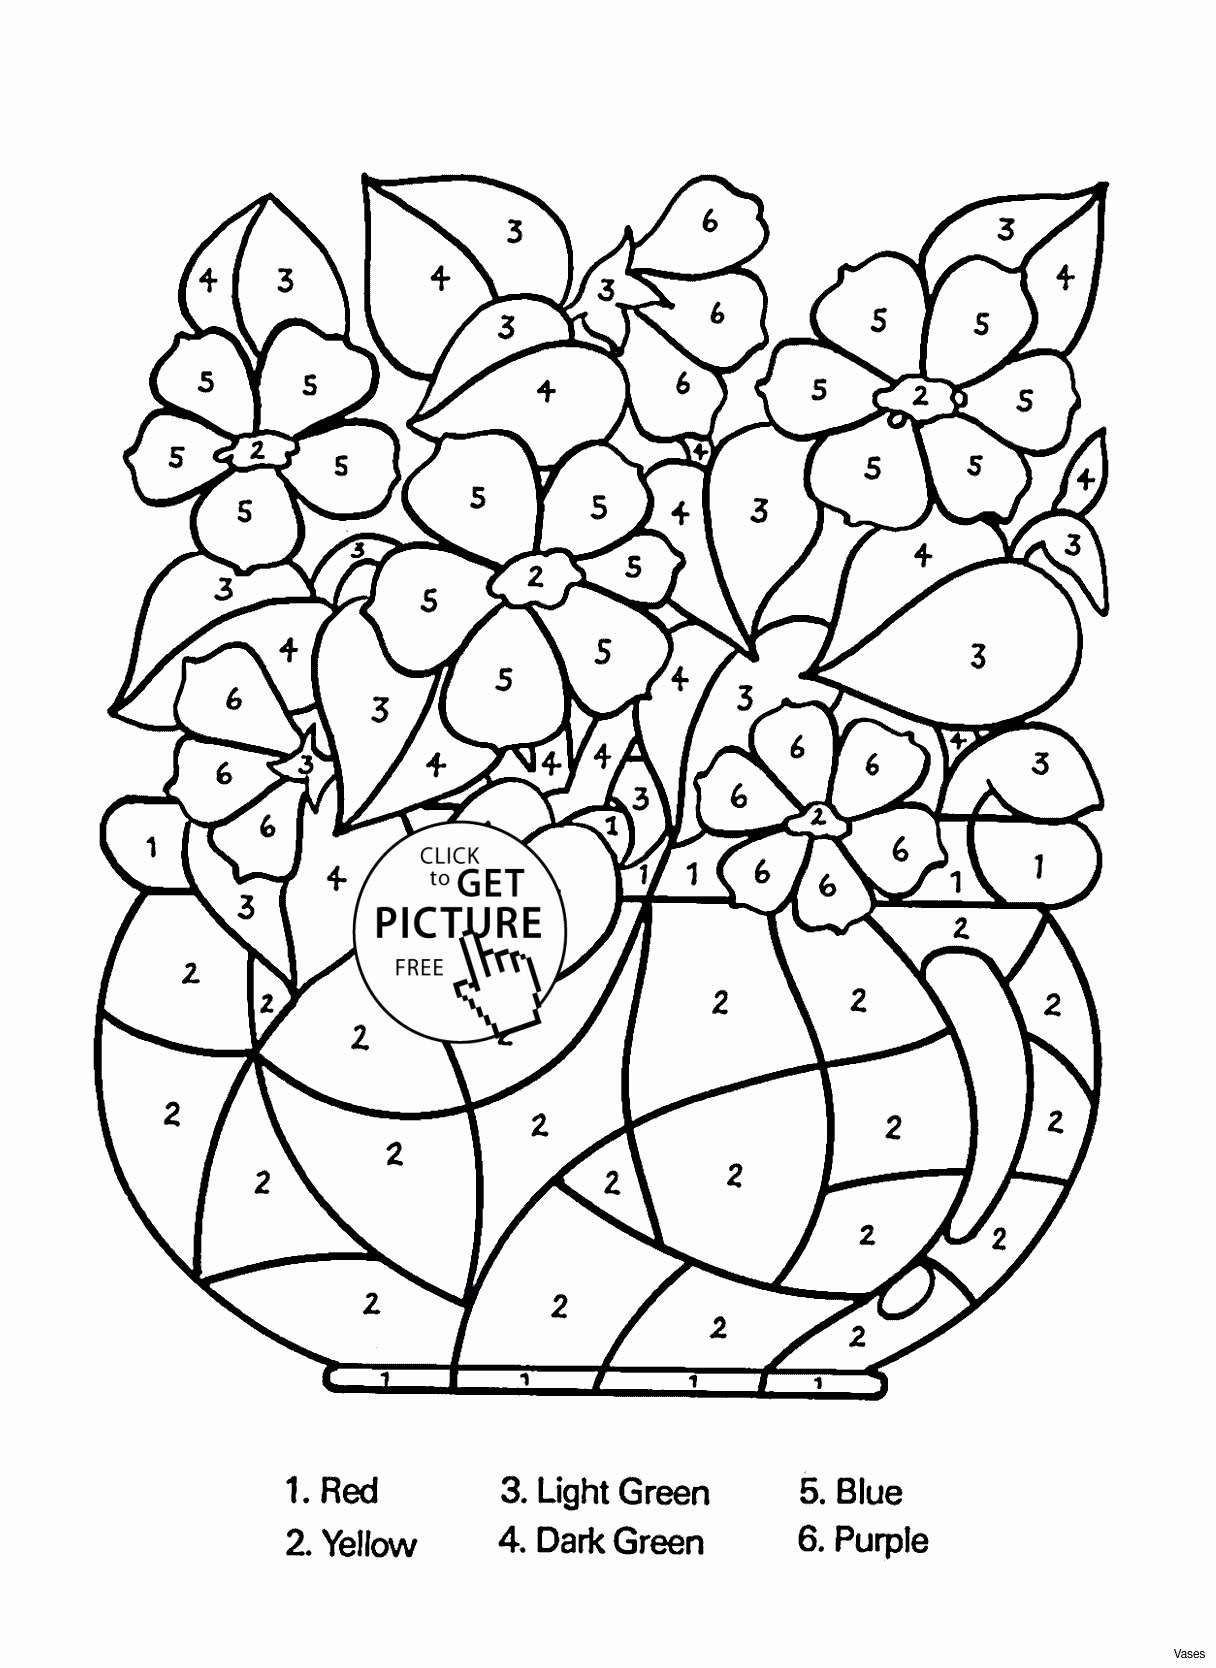 yellow vases ikea of white glass vase elegant vases flower vase coloring page pages inside white glass vase elegant vases flower vase coloring page pages flowers in a top i 0d